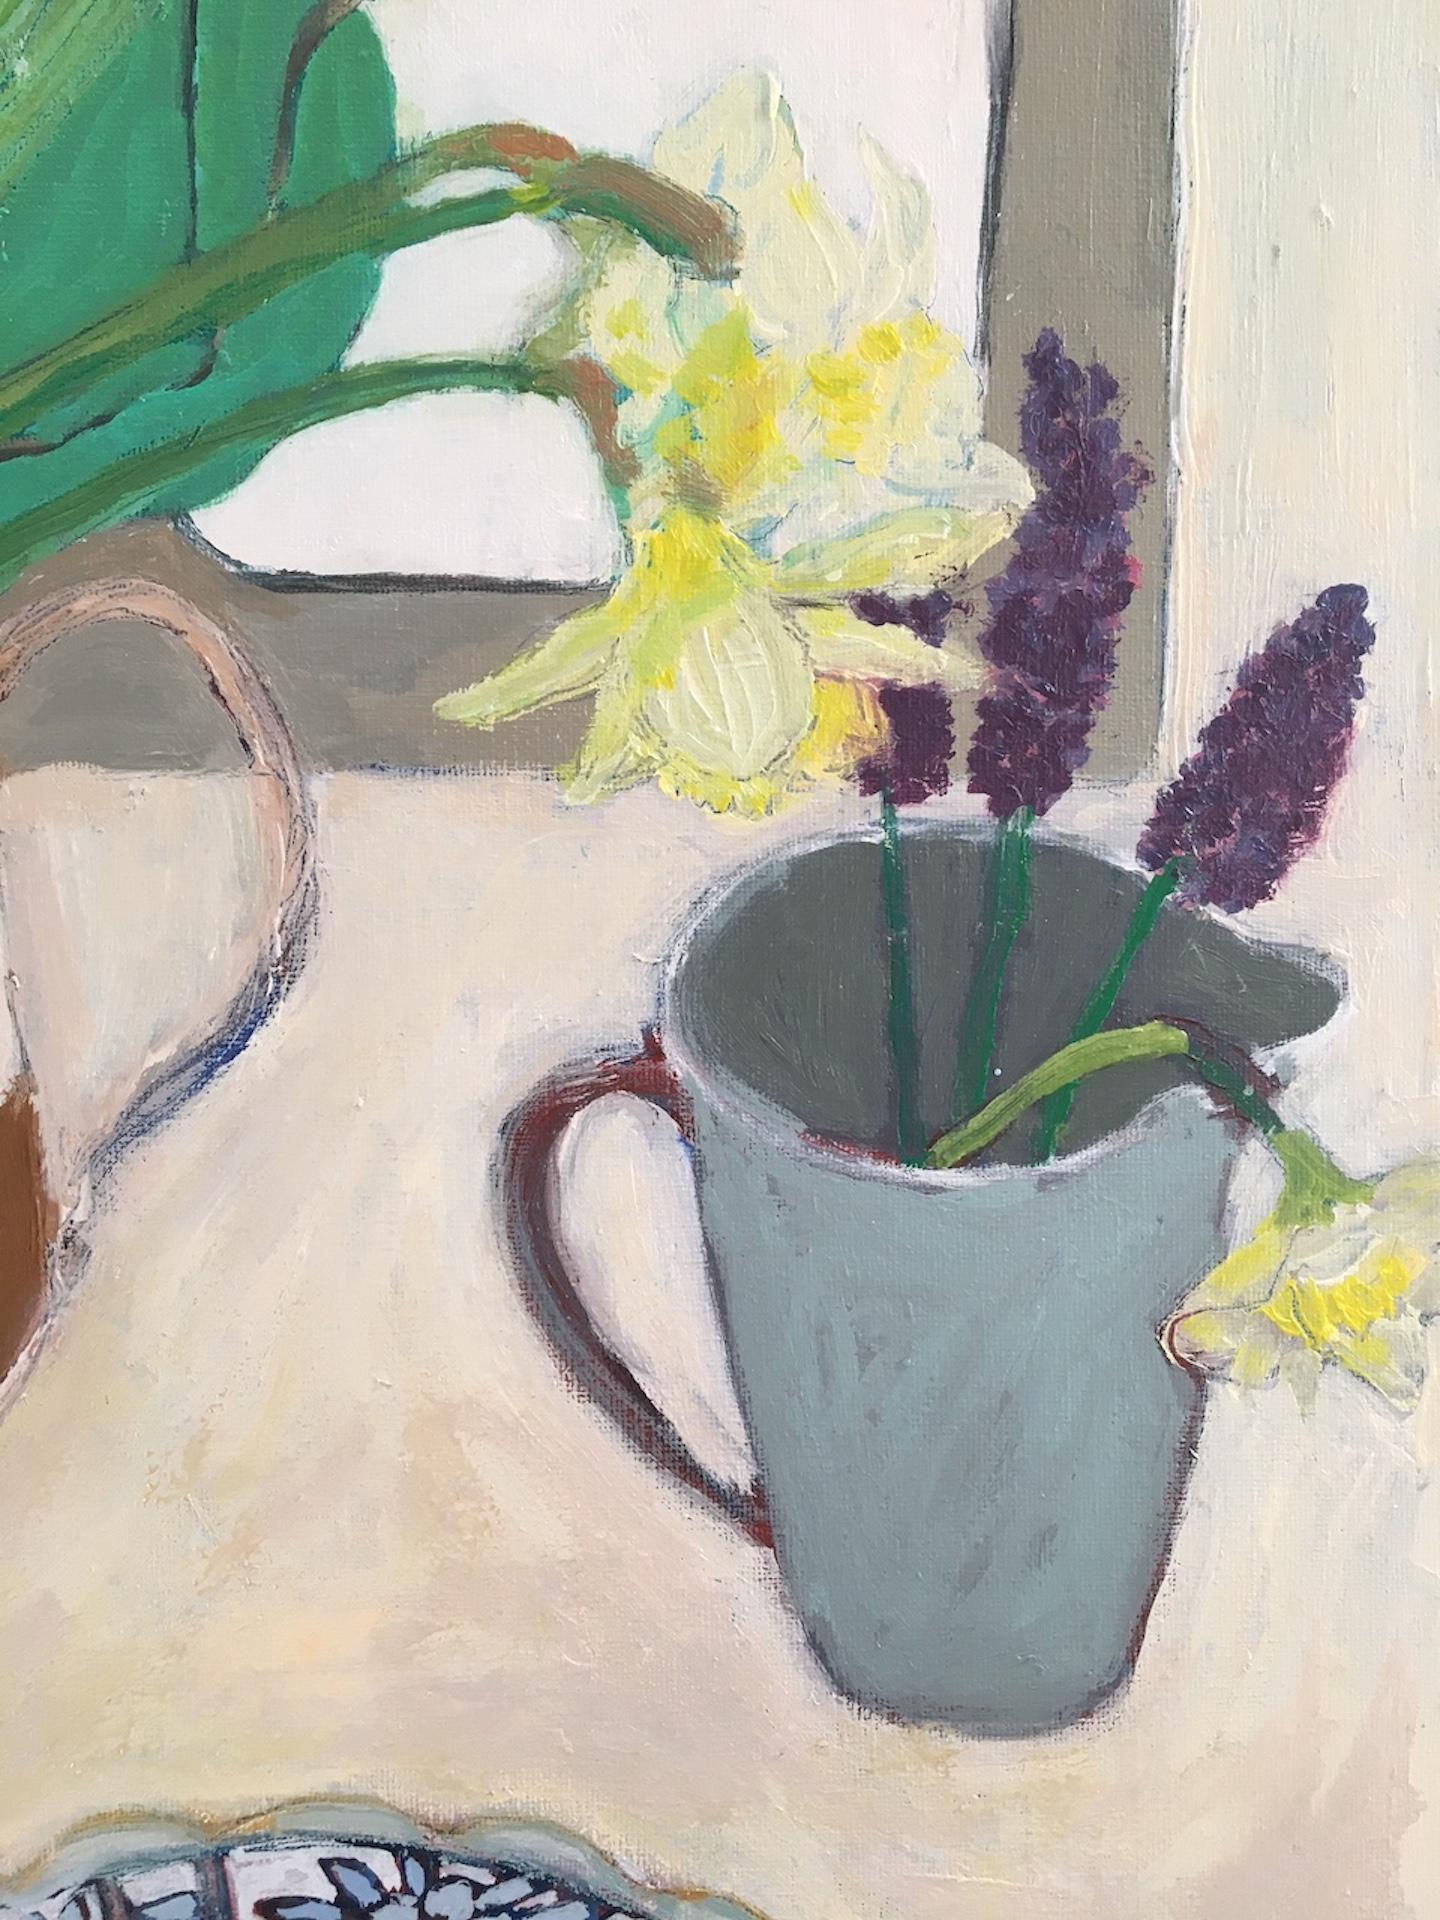 Daffodils, Snowdrops and Grape Hyacith [2020]
Original
Still Life
Oil Paint on Canvas
Complete Size of Unframed Work: H:51 cm x W:41 cm x D:19cm
Sold Unframed
Please note that insitu images are purely an indication of how a piece may